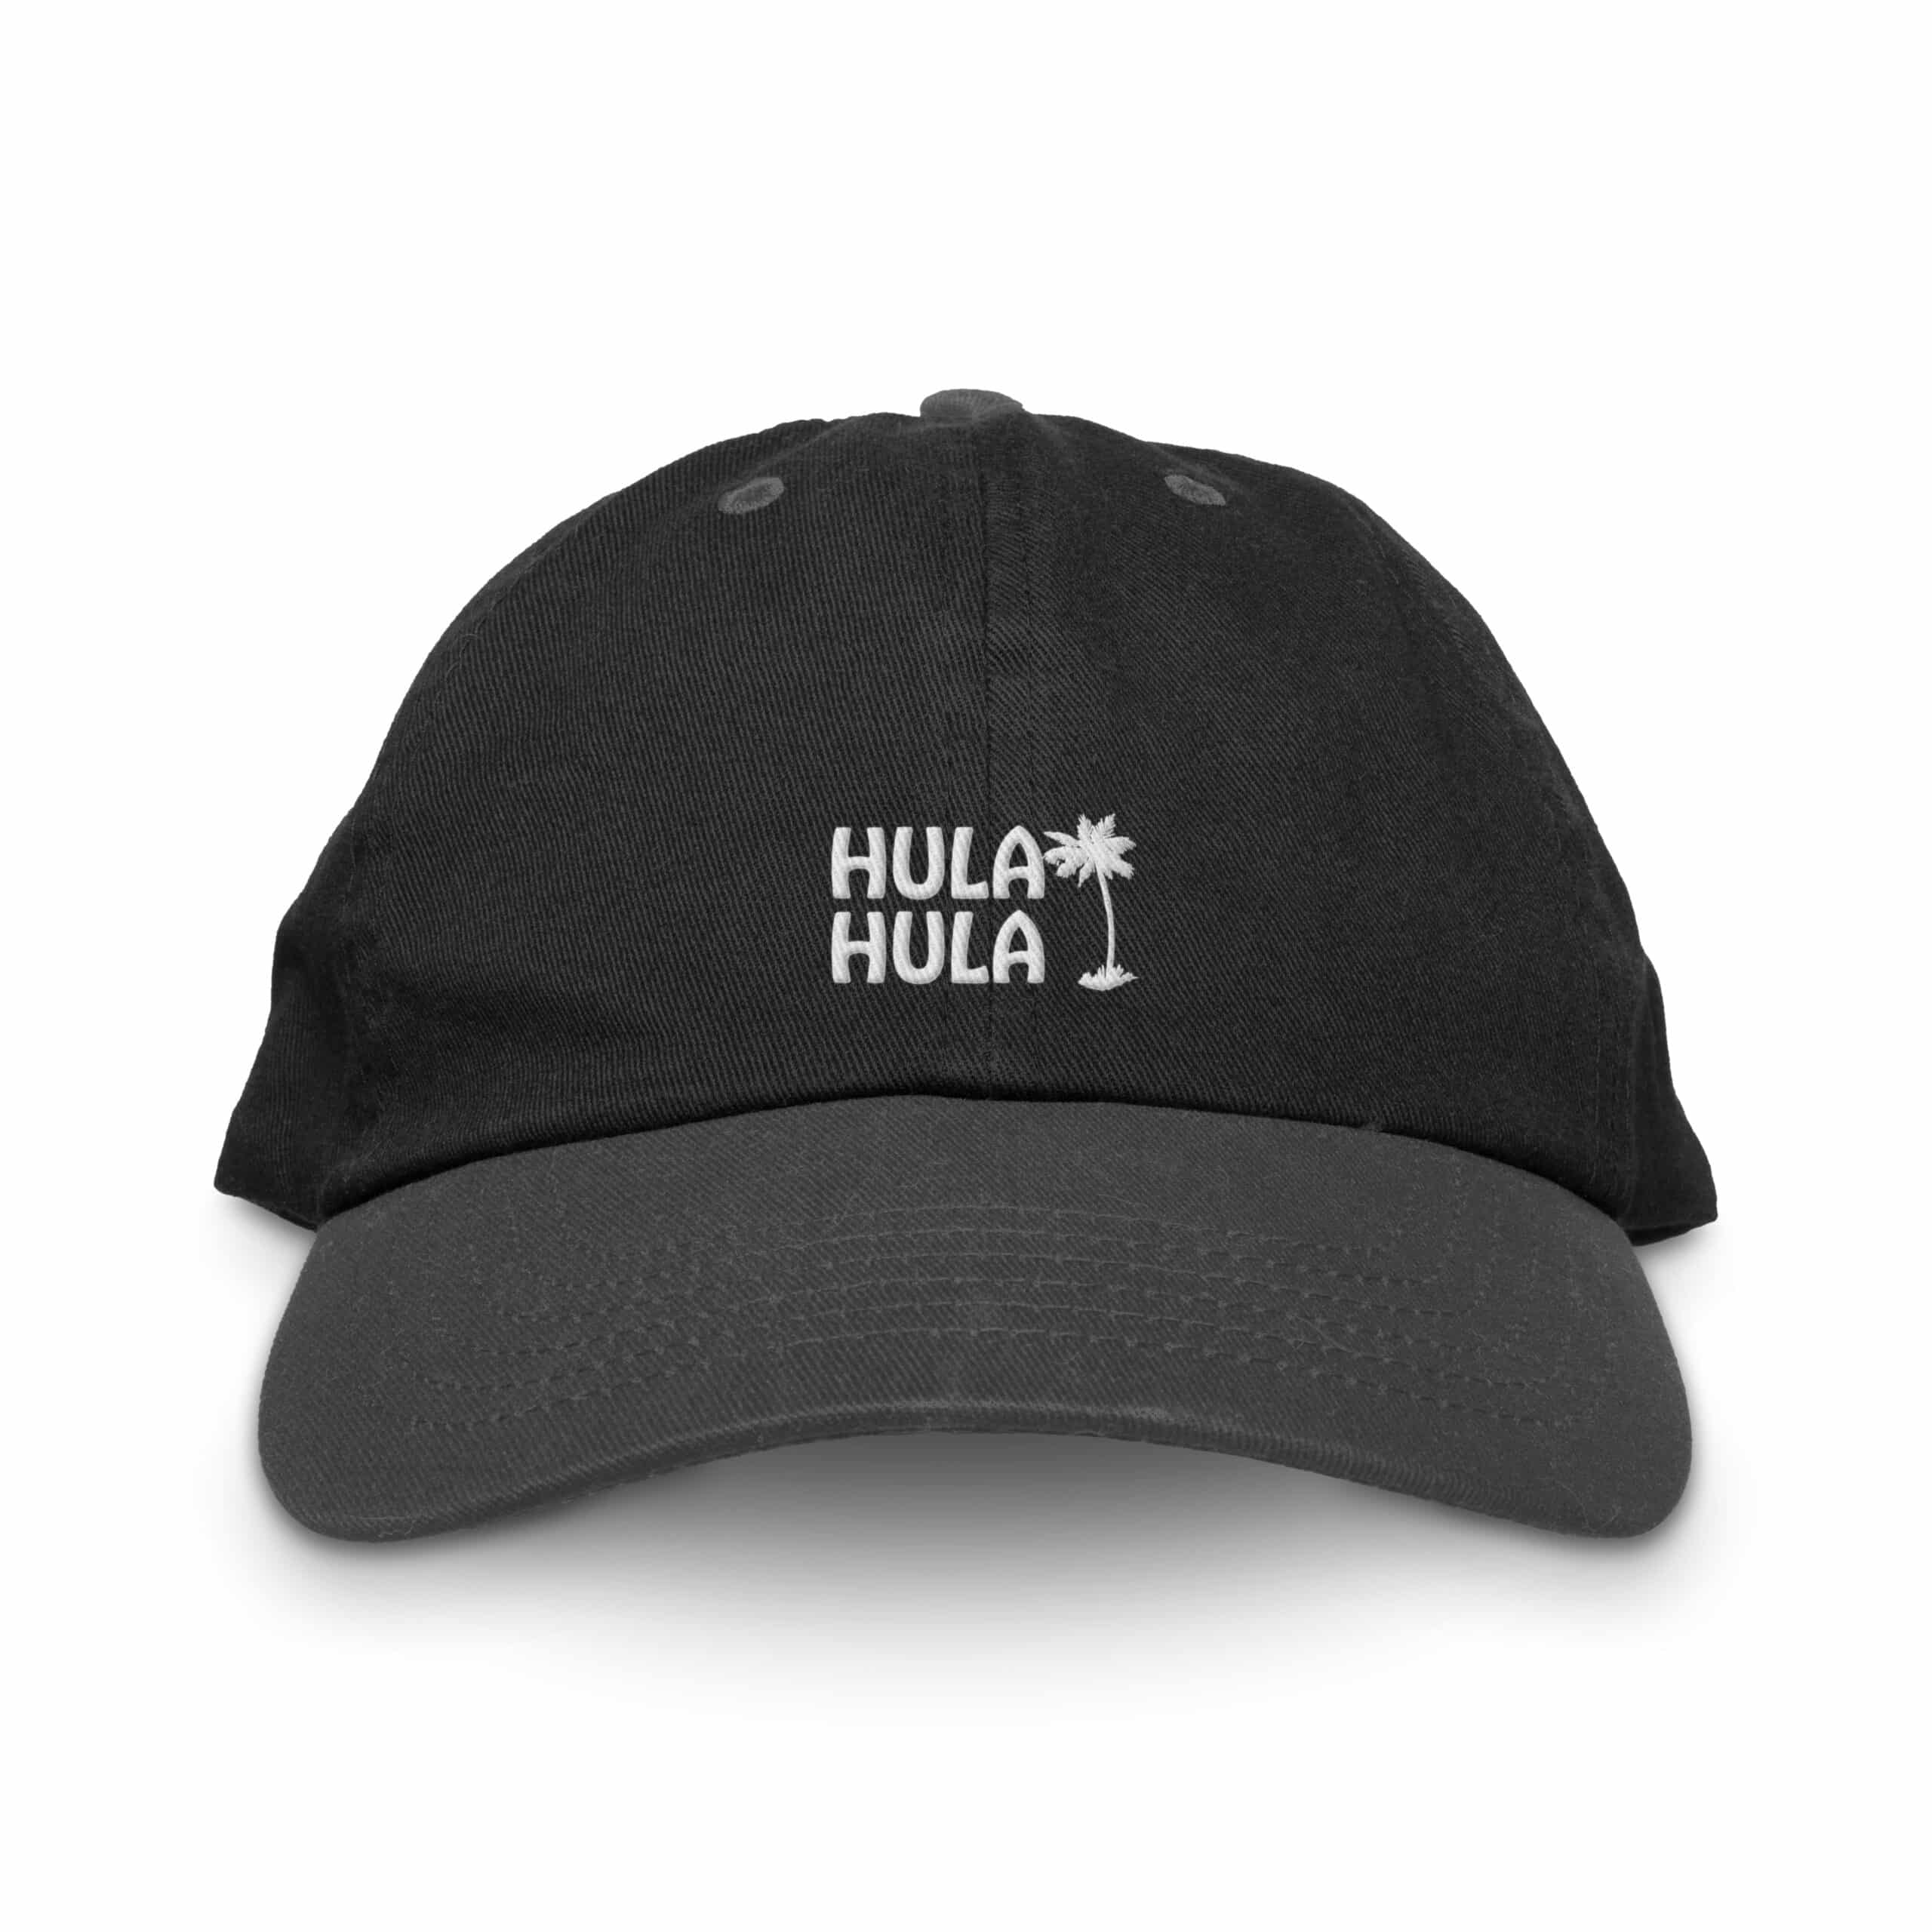 Dad hat for The Hula Hula Room Tiki Bar in Torrance California designed by Stellen Design logo design and branding agency in Los Angeles California specializing in logo design for hospitality brands